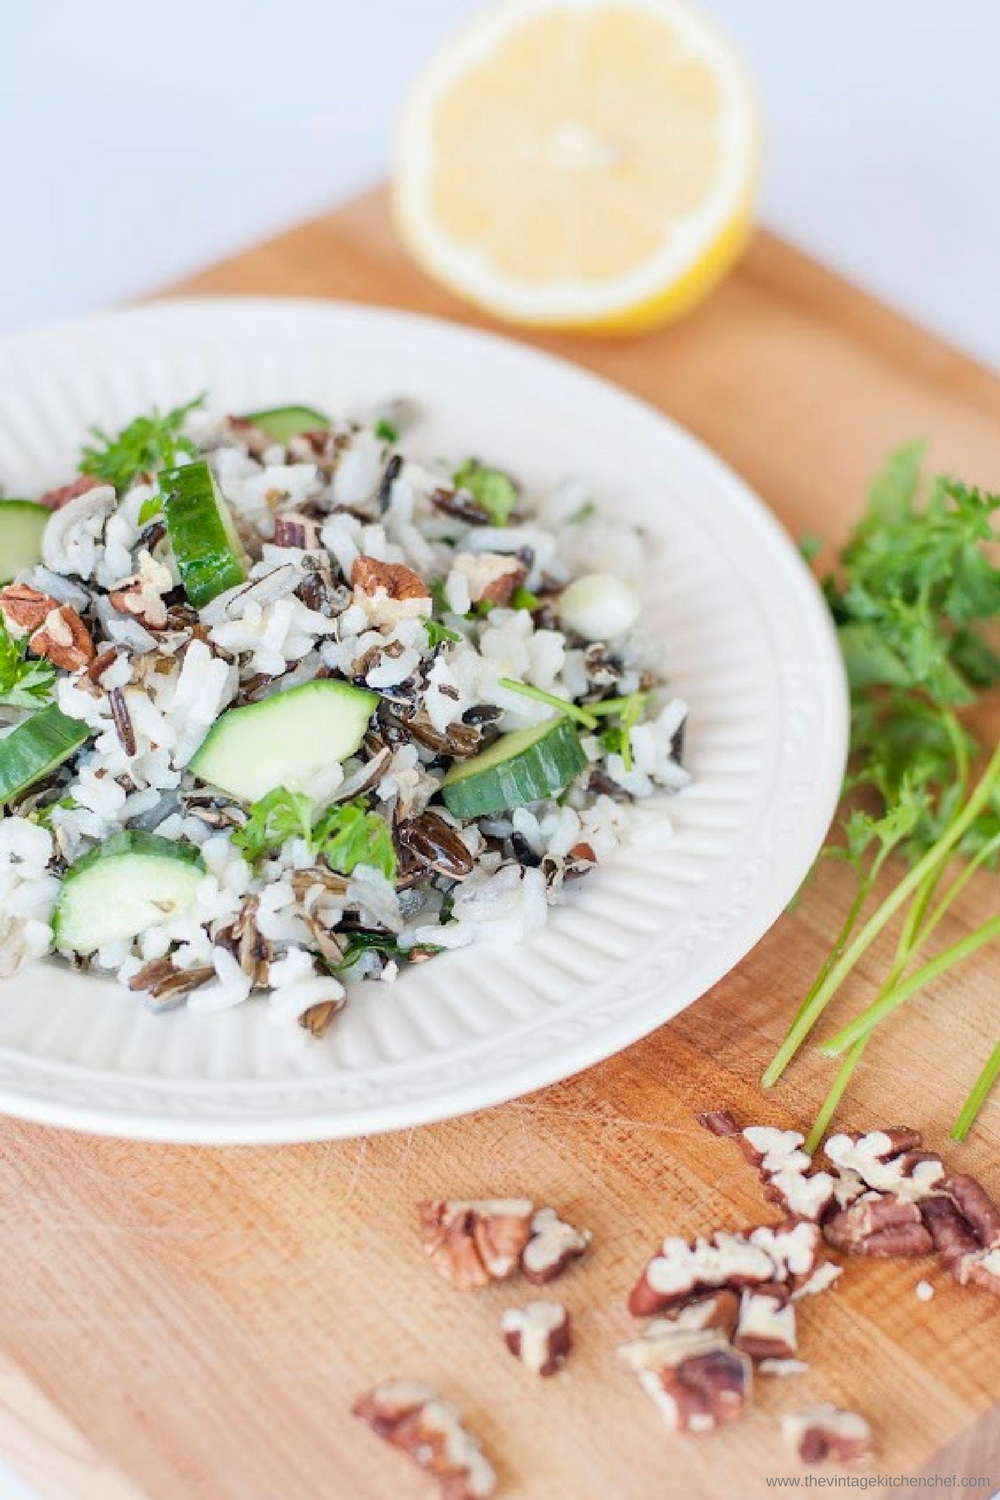 With a bit of crunch here and a bit of savory there, Wild Rice Salad is a blend of subtle flavors that treat your taste buds.